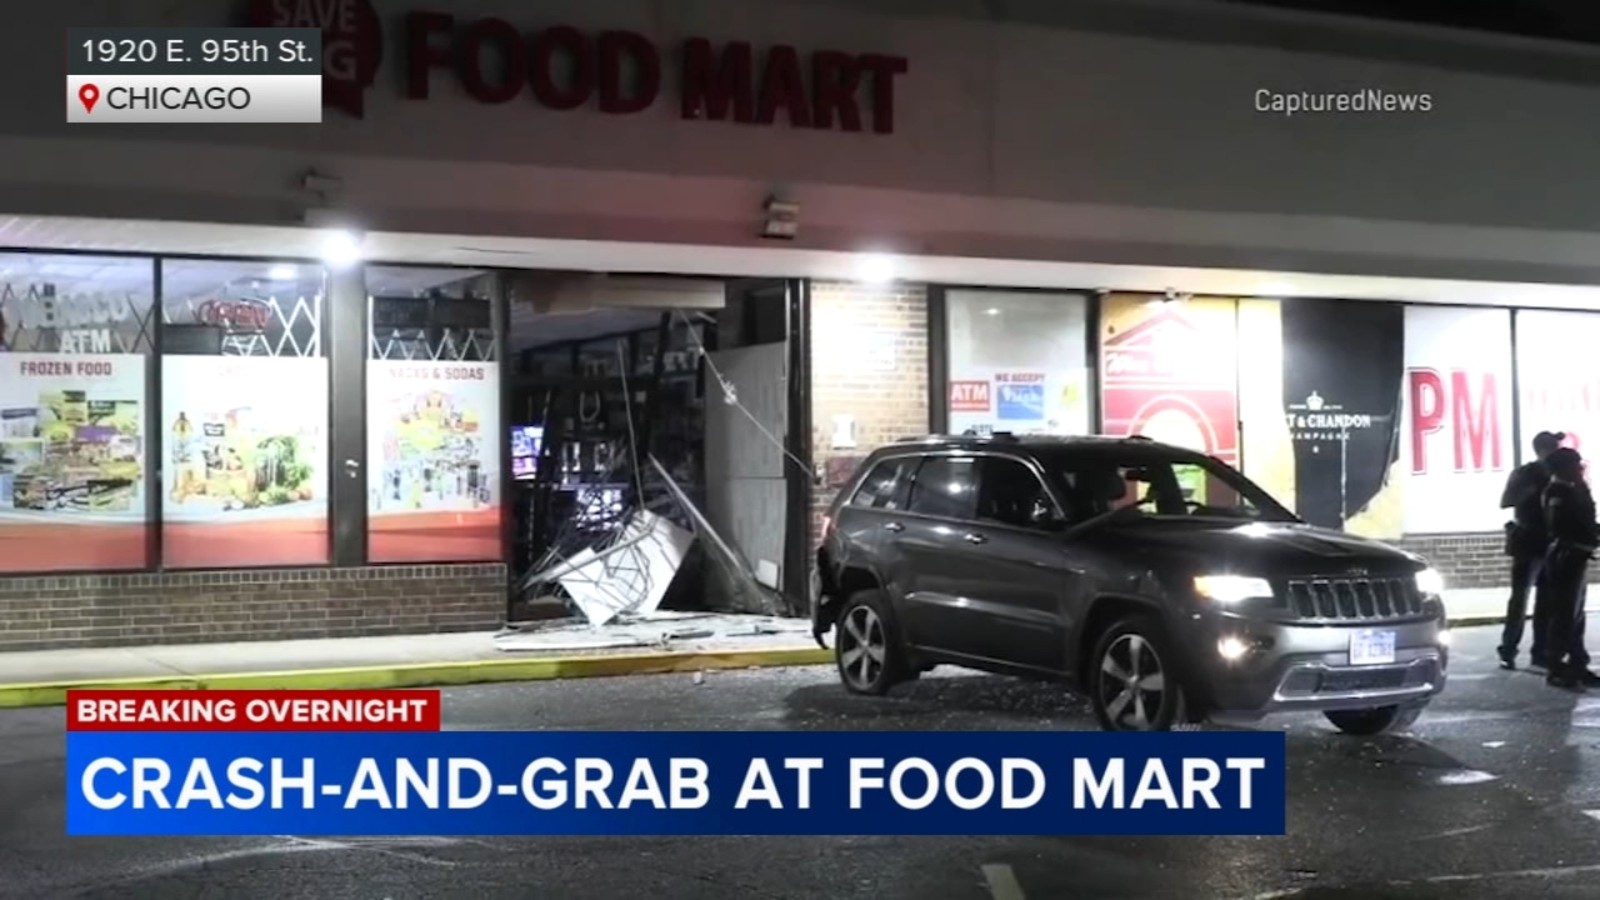 Jeep crashes into food mart in 'crash-and-grab' burglary in Calumet Heights, Chicago police say